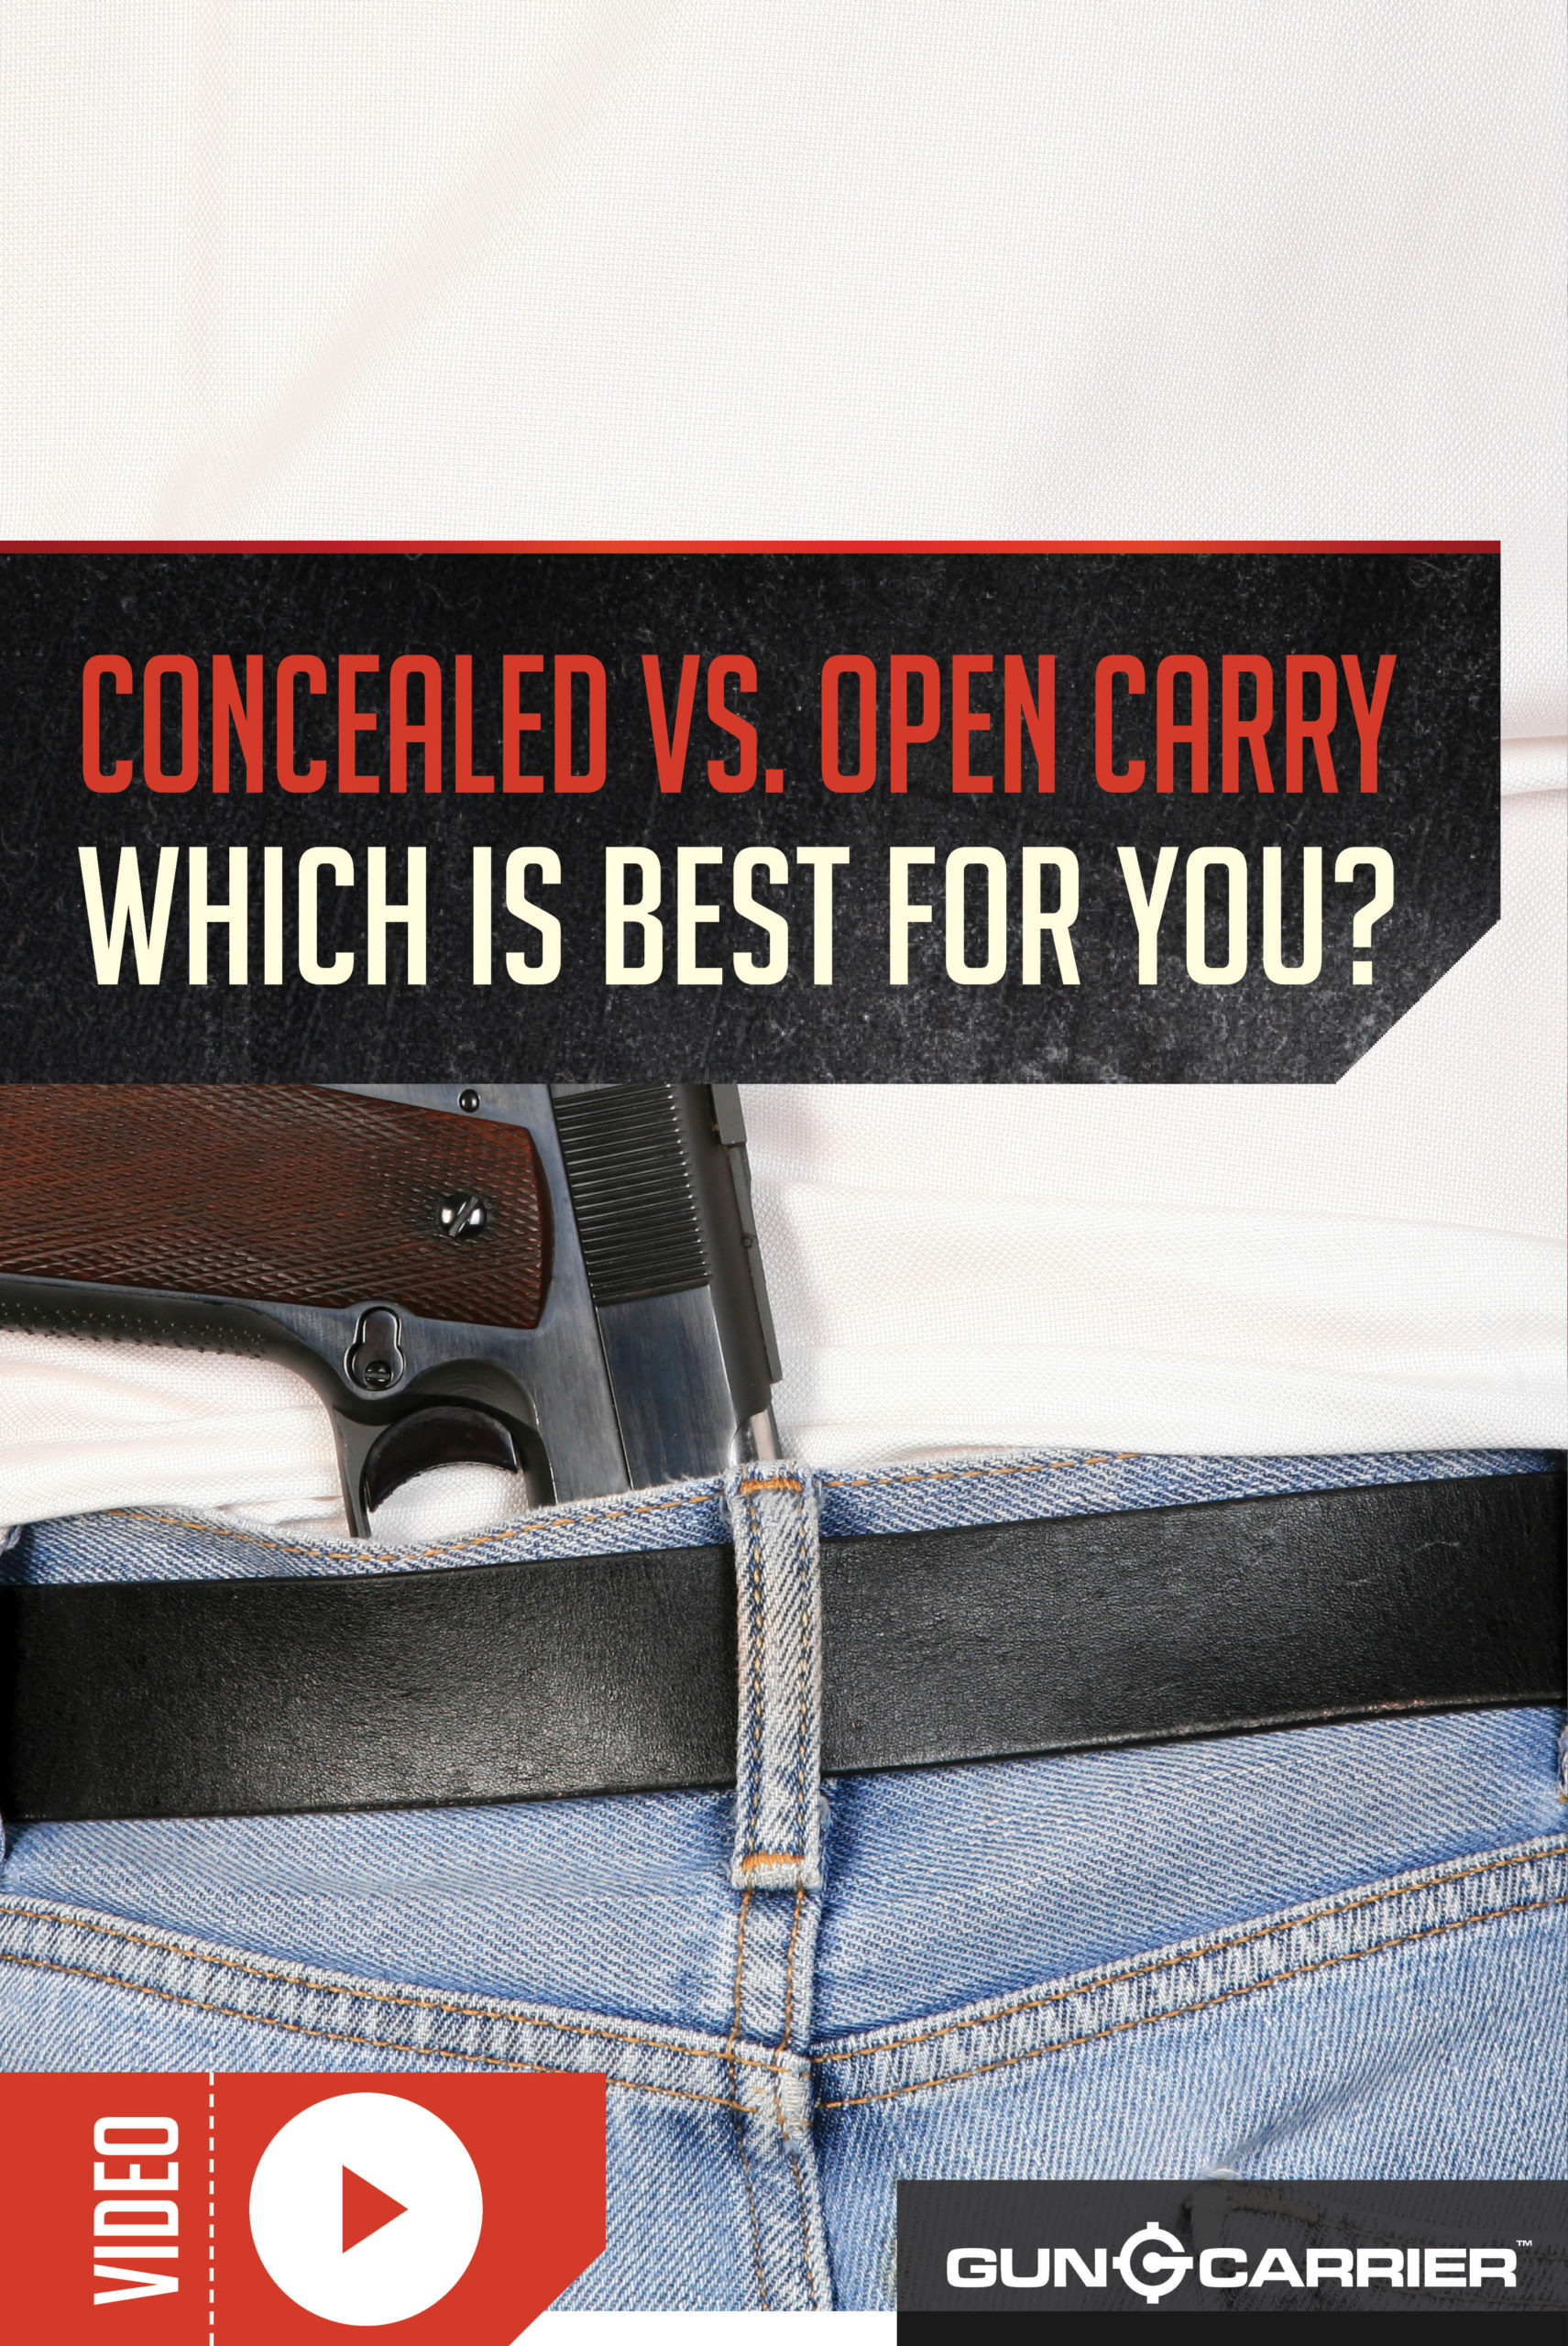 Concealed Carry vs. Open Carry by Gun Carrier at https://guncarrier.com/concealed-carry-vs-open-carry/